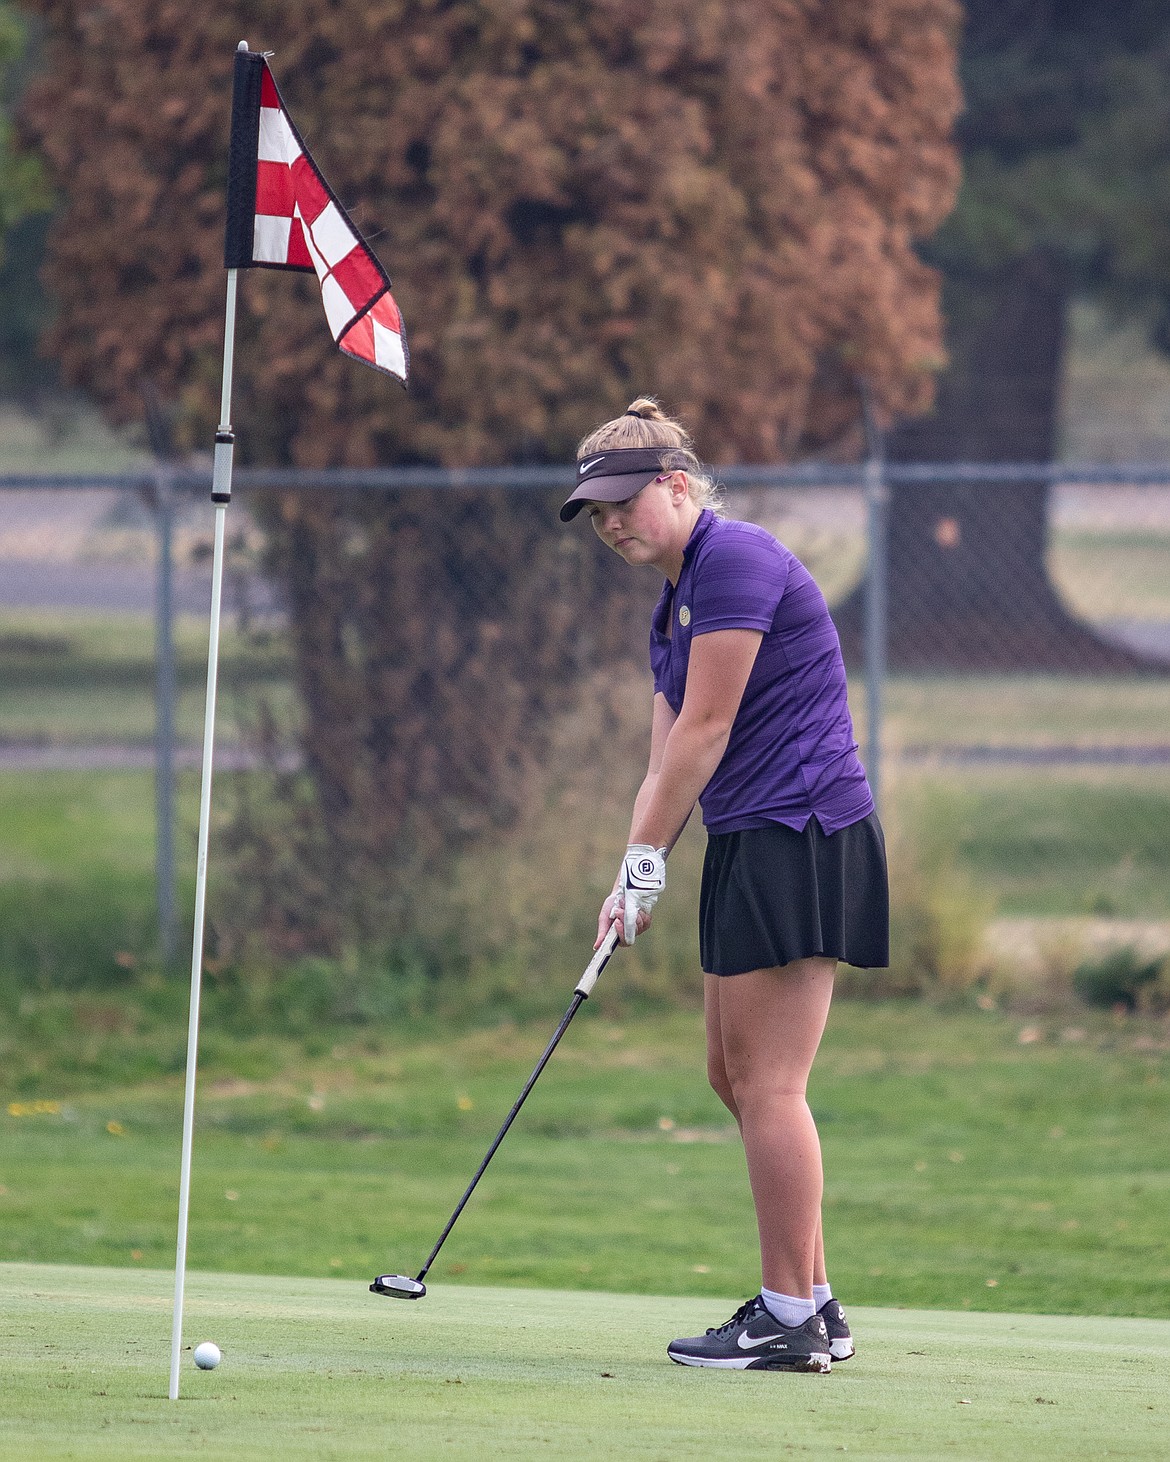 Polson Lady Pirate Ashley Maki sinks her putt on the 11th hole.
(Lake County Leader file photo)